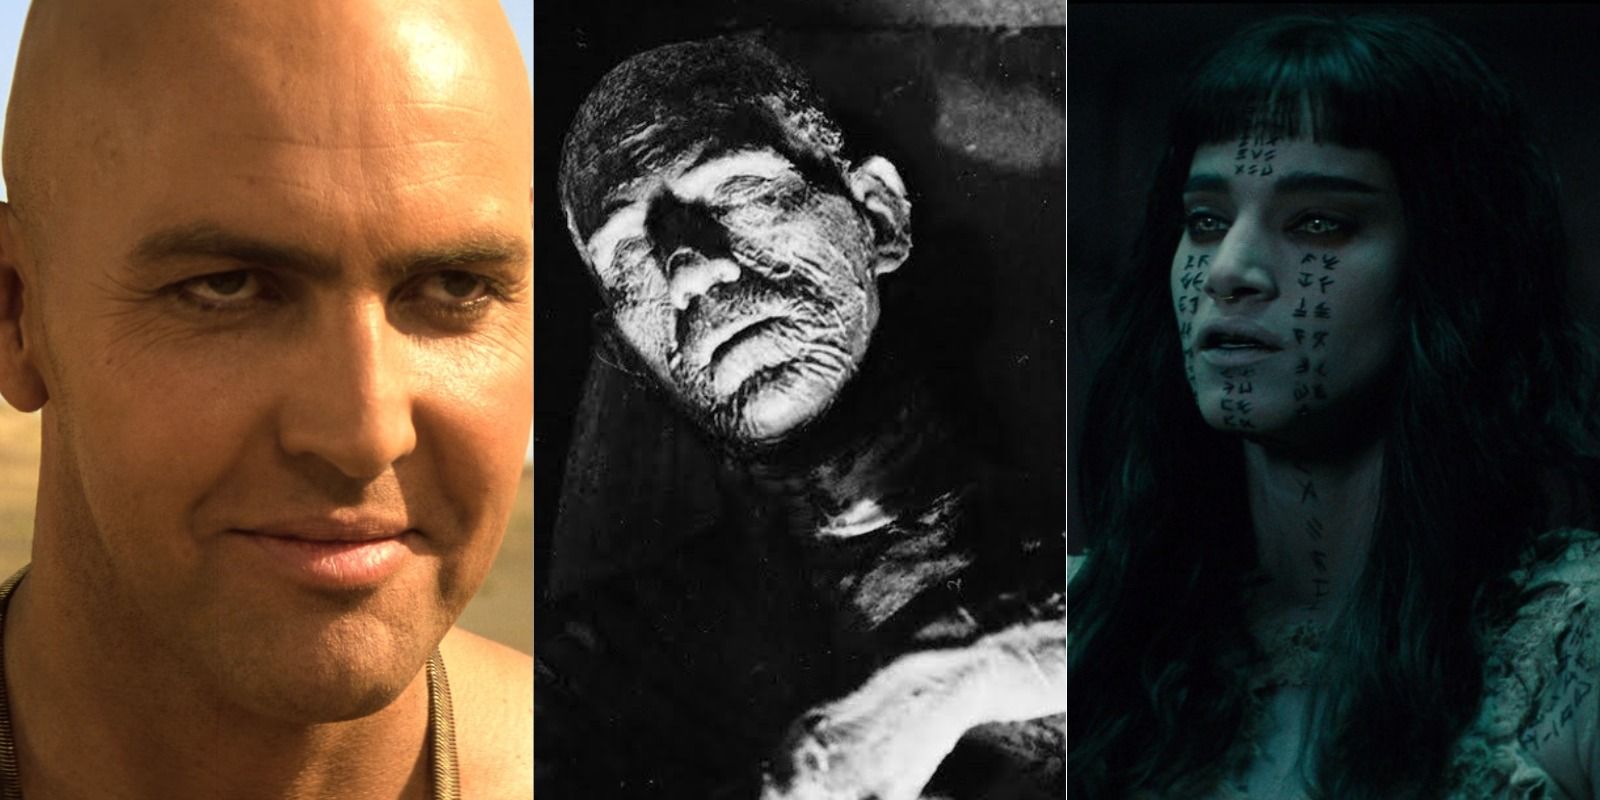 imhotep the mummy actor